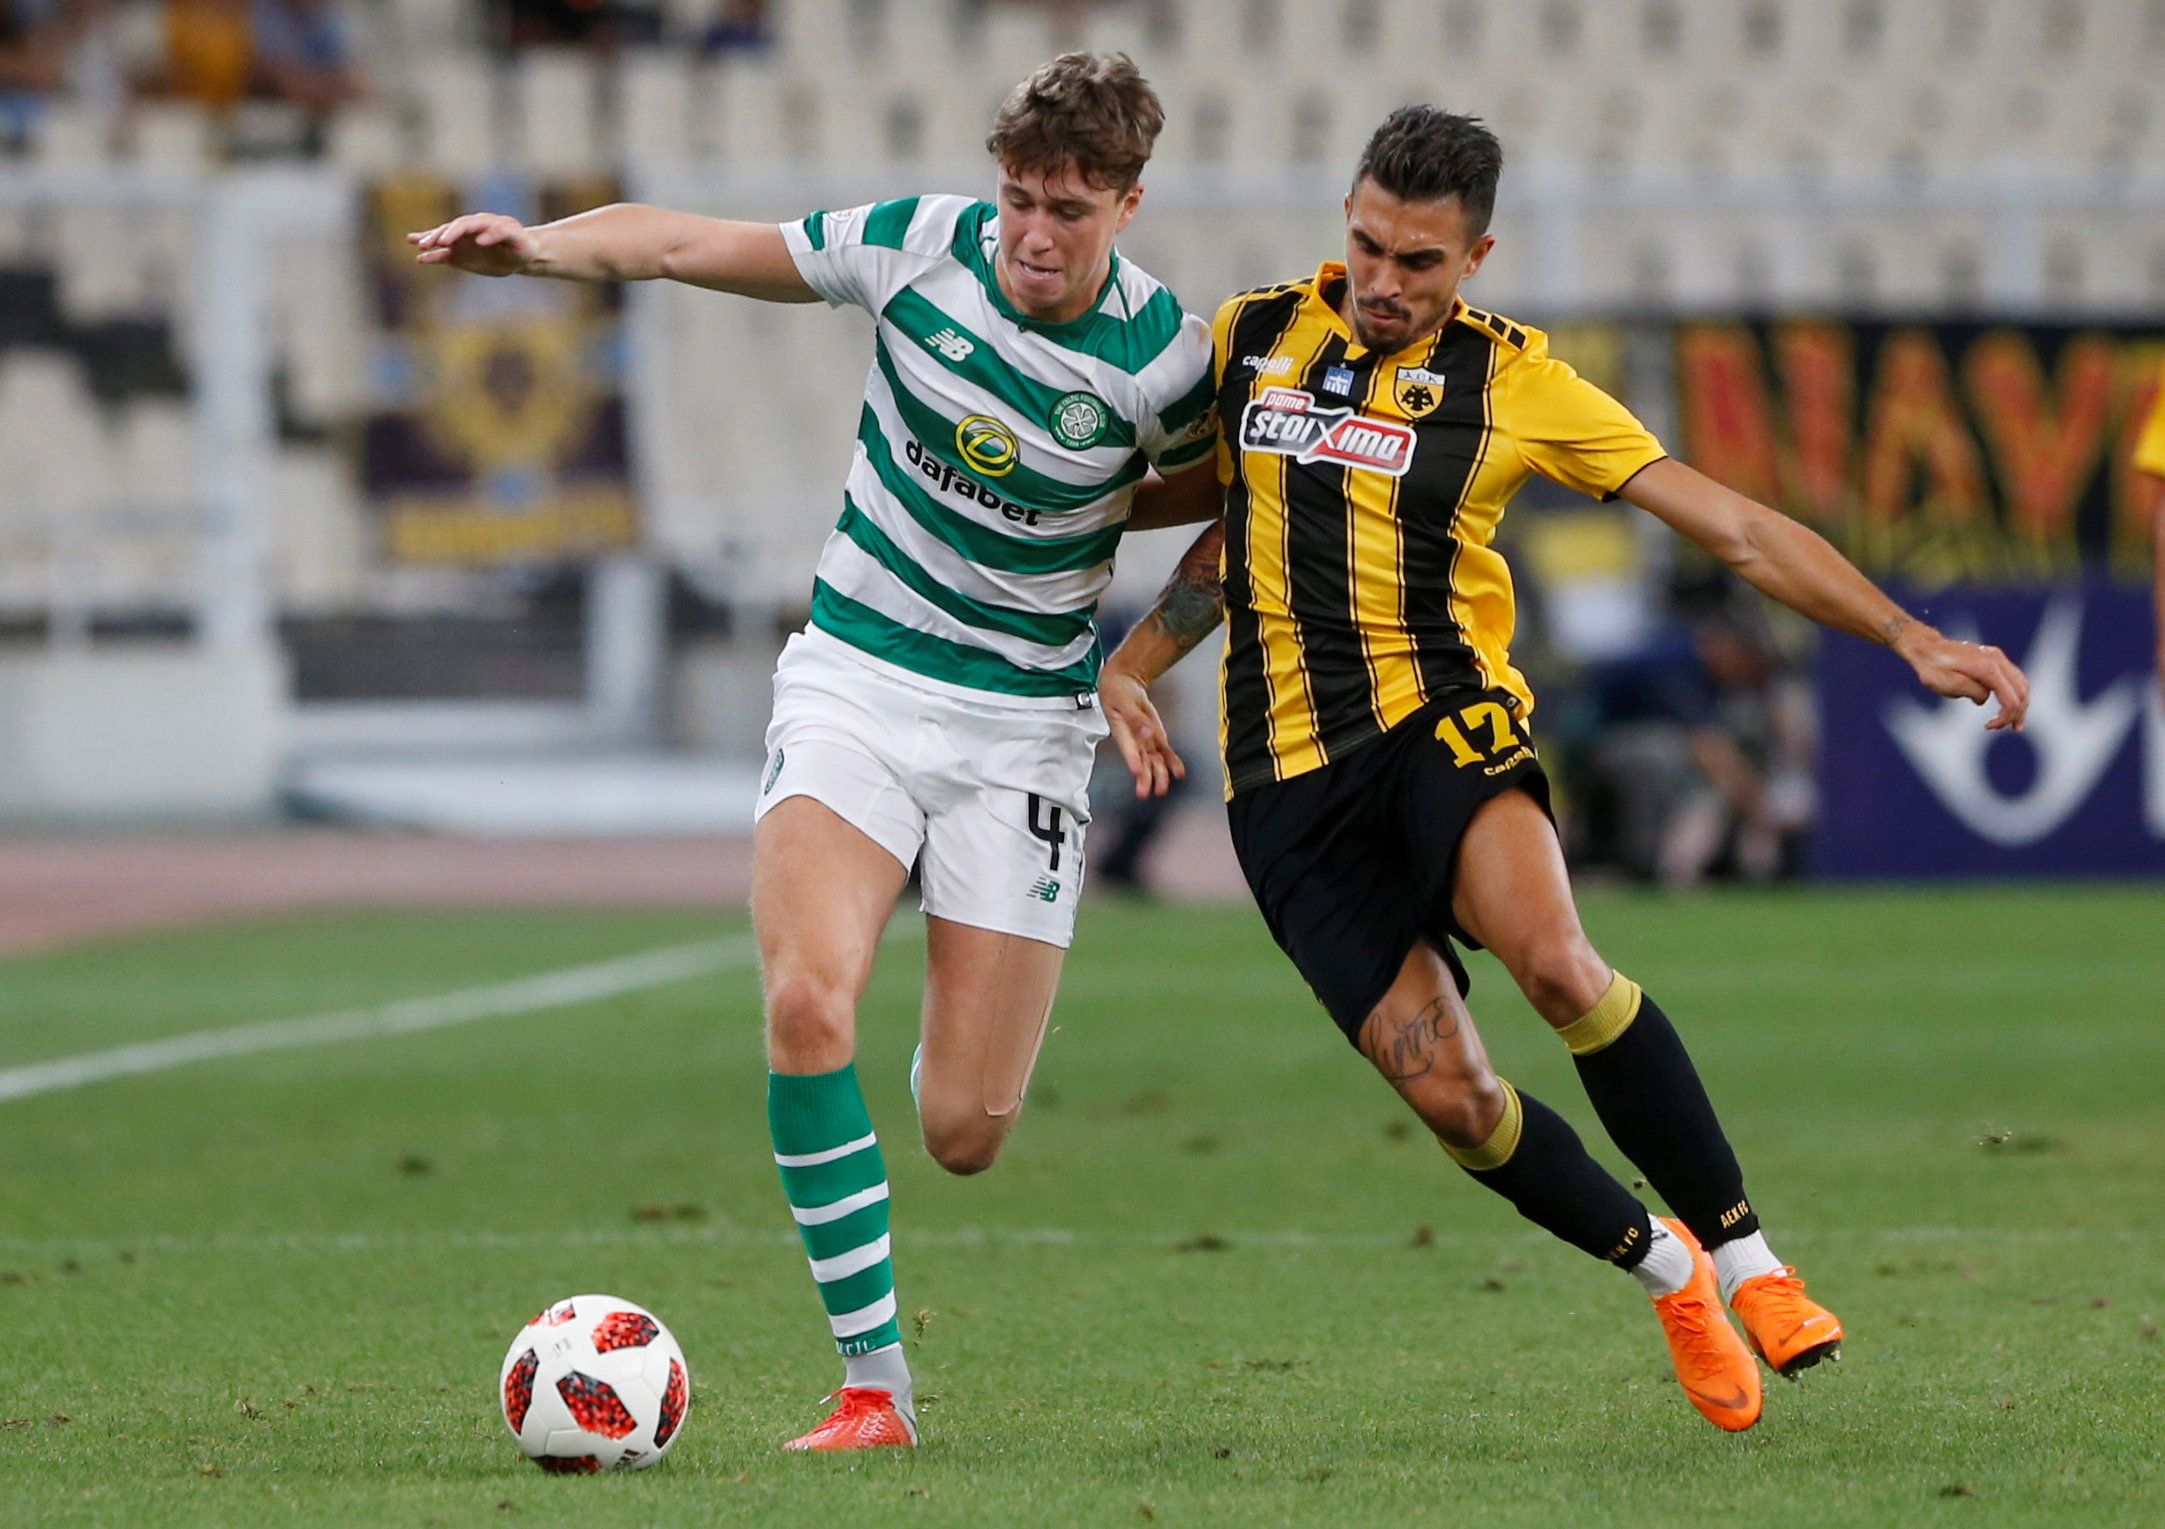 Soccer Football - Champions League - Third Qualifying Round Second Leg - AEK Athens v Celtic - Athens Olympic Stadium, Athens, Greece - August 14, 2018  Celtic's Jack Hendry in action with AEK Athens' Viktor Klonaridis   REUTERS/Alkis Konstantinidis